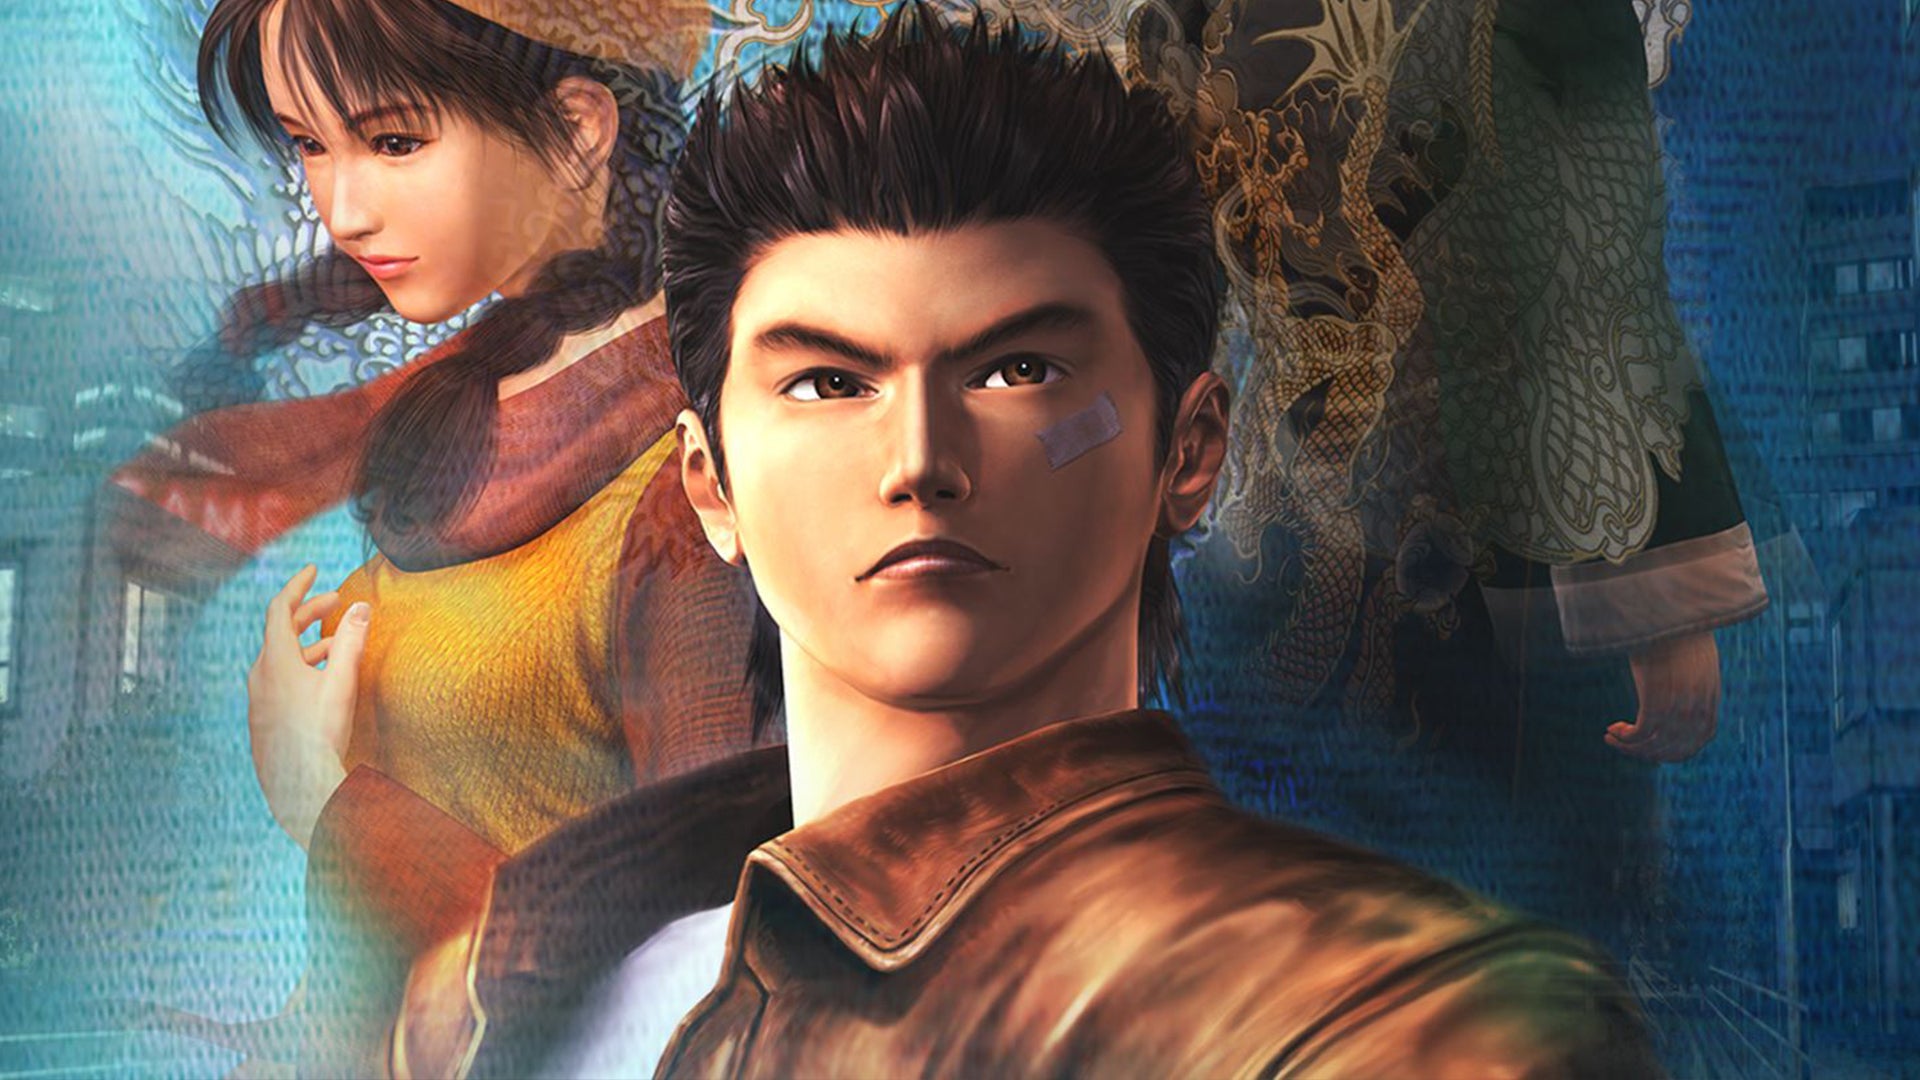 Image for Shenmue 1+2 HD Remaster: The Ultimate Version - PS4 Pro/Xbox One X/PC and Dreamcast Tested!